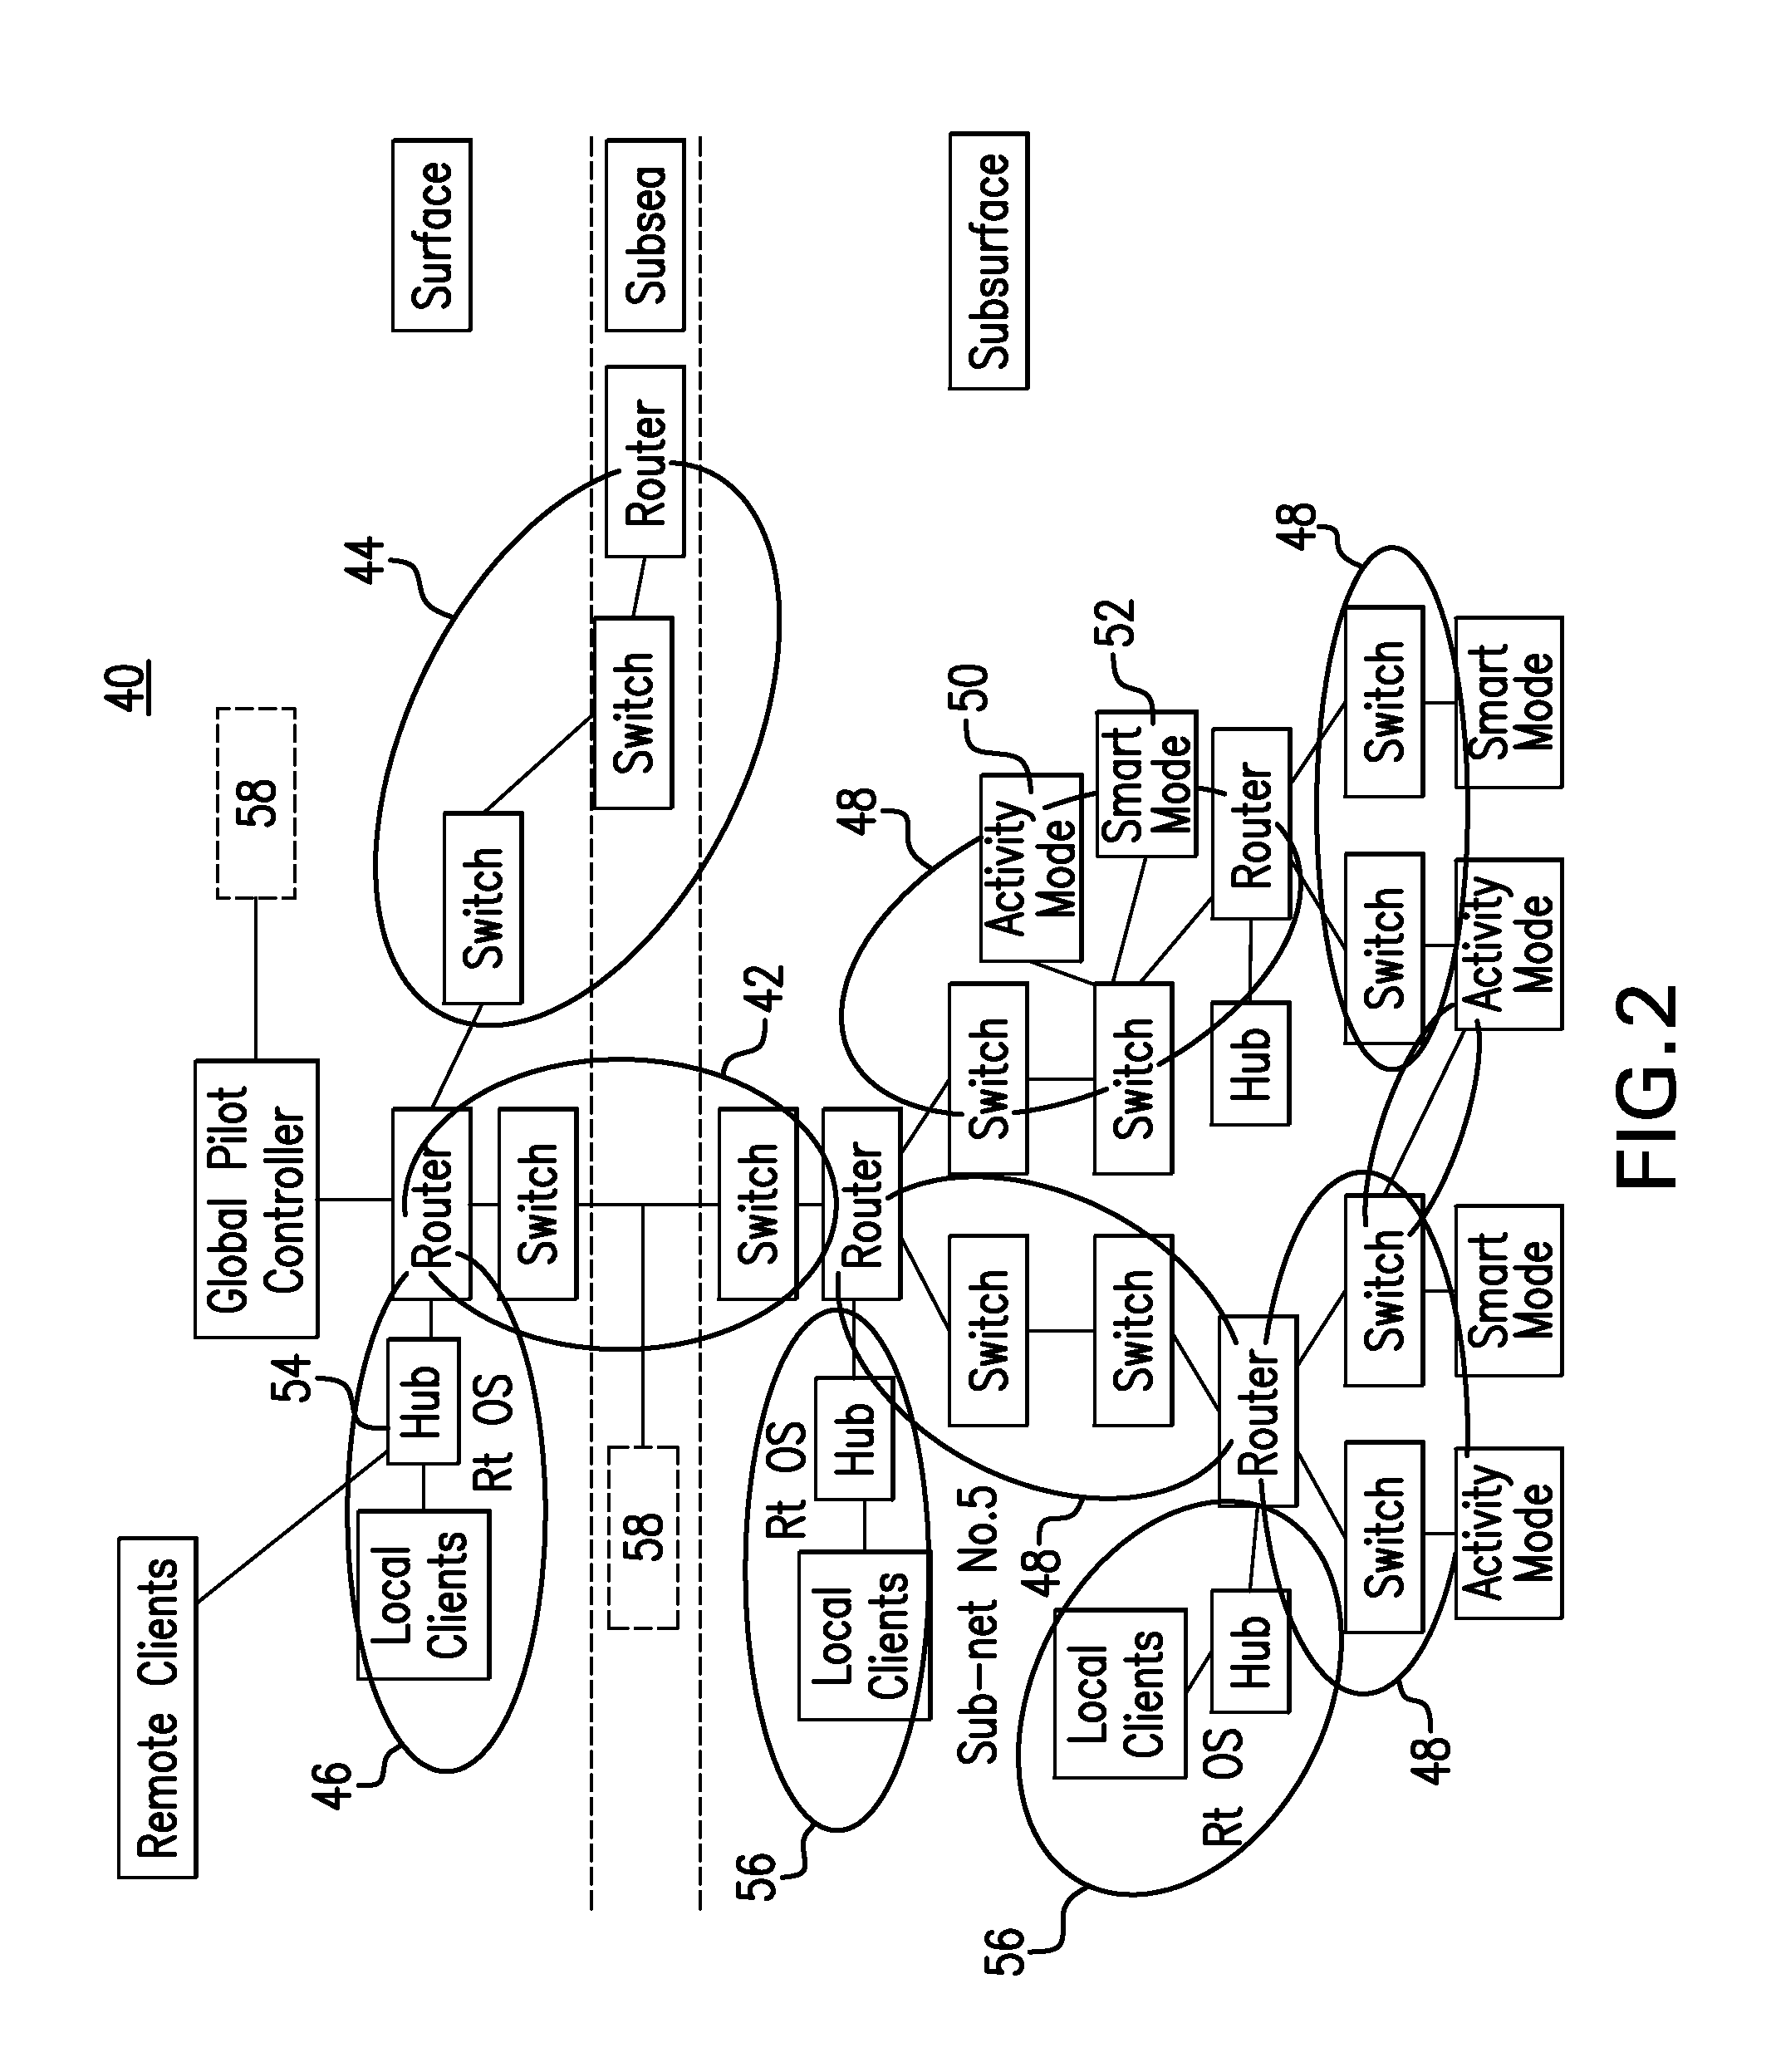 Communication between downhole tools and a surface processor using a network